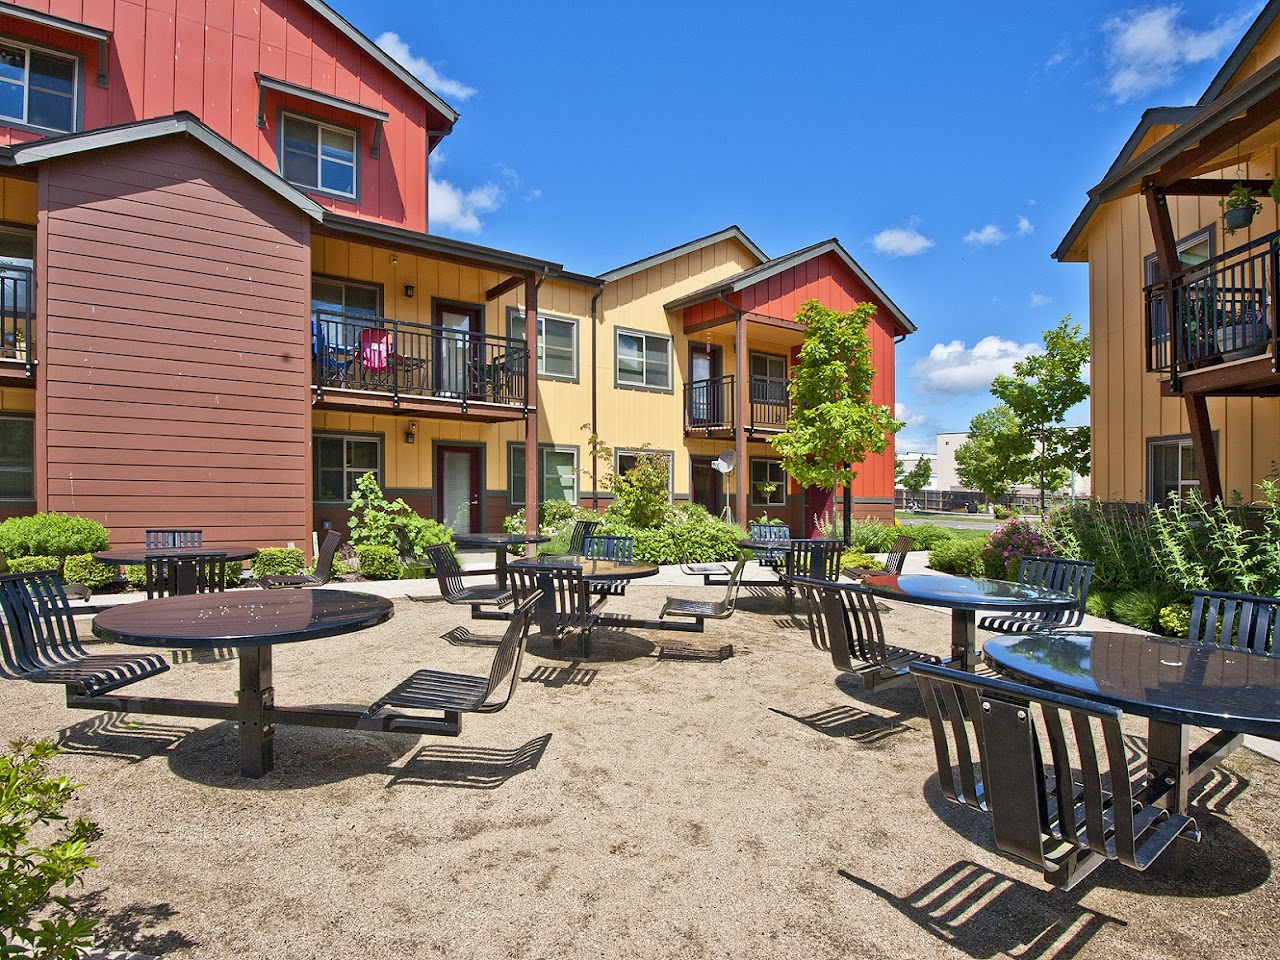 Photo of PRAIRIE VIEW. Affordable housing located at 584 N DANEBO AVE EUGENE, OR 97402